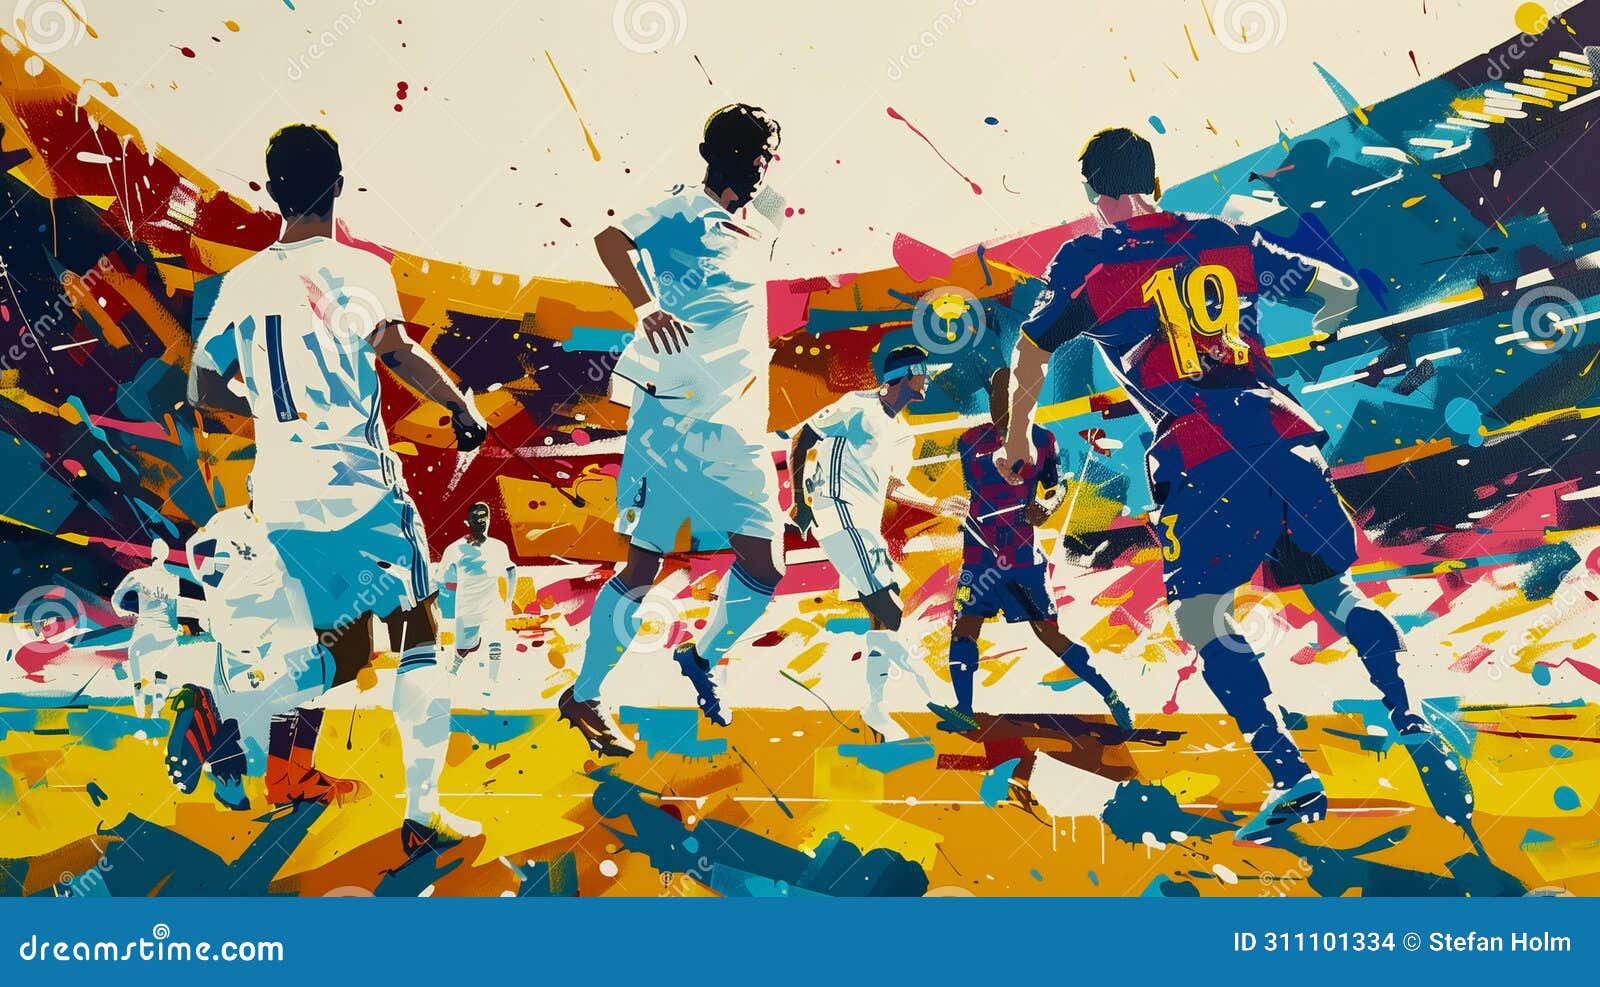 painting of the football game el clasico, colorful, bursting with the colors of both teams, white and gold, blue and maroon.